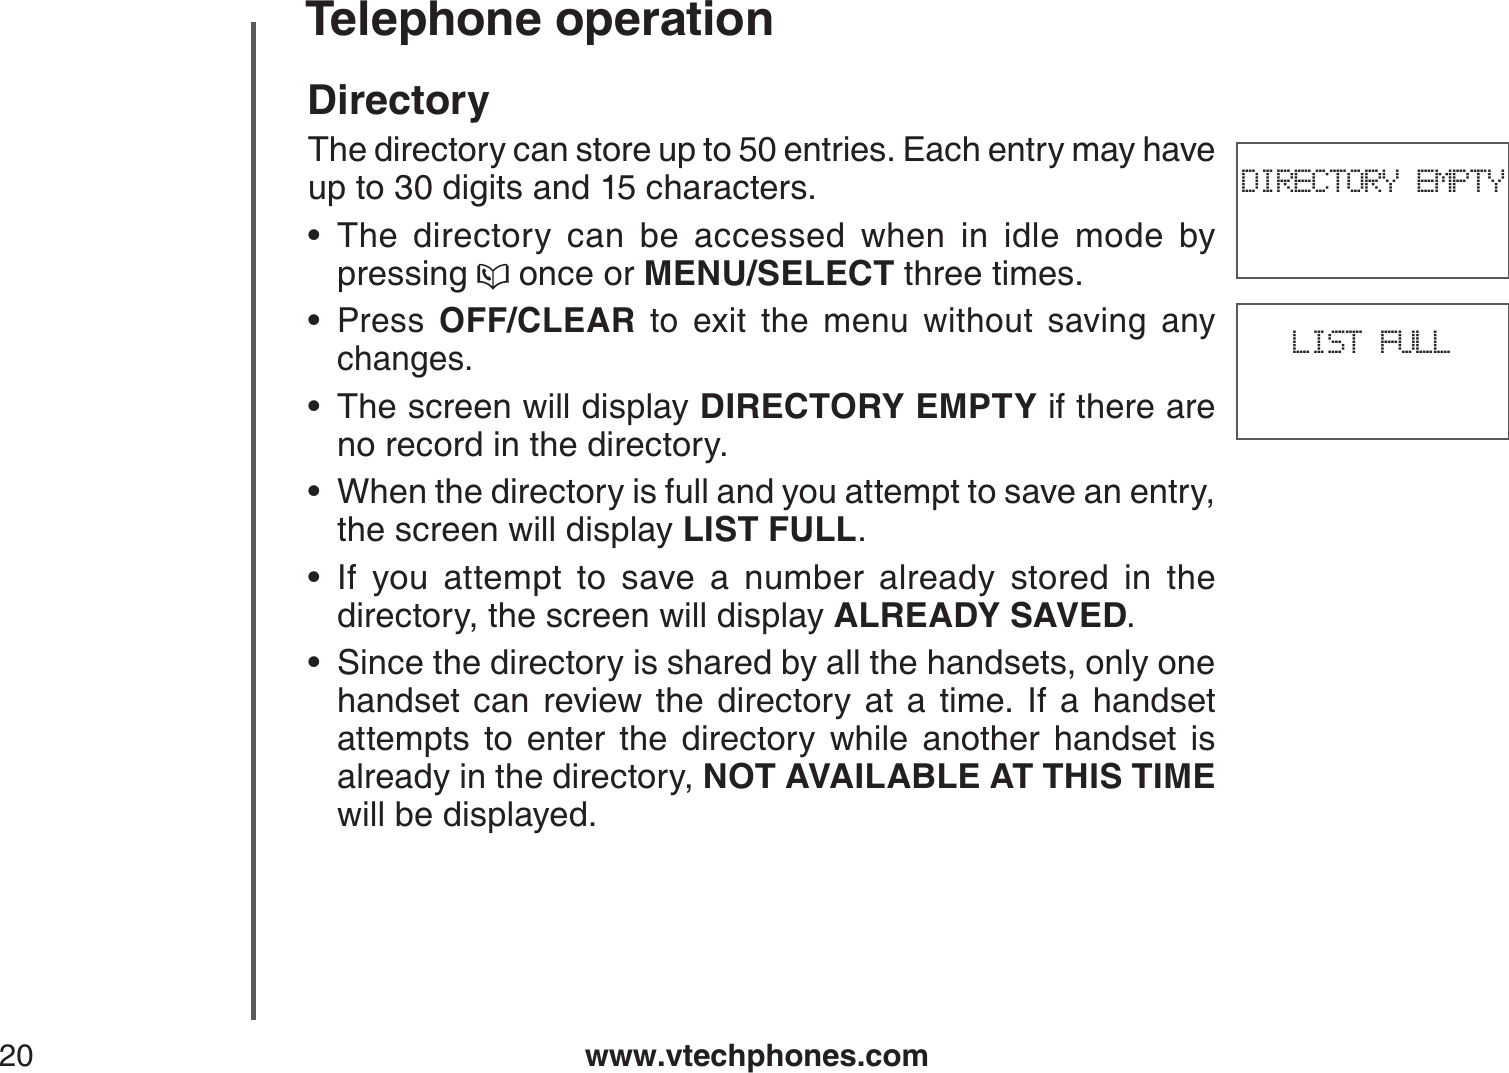 www.vtechphones.com20Telephone operationDirectoryThe directory can store up to 50 entries. Each entry may have up to 30 digits and 15 characters.The directory can be accessed when in idle mode by pressing   once or MENU/SELECT three times.Press  OFF/CLEAR to exit the menu without saving any changes.The screen will display DIRECTORY EMPTY if there are no record in the directory.When the directory is full and you attempt to save an entry, the screen will display LIST FULL.If you attempt to save a number already stored in the directory, the screen will display ALREADY SAVED.Since the directory is shared by all the handsets, only one handset can review the directory at a time. If a handset attempts to enter the directory while another handset isalready in the directory, NOT AVAILABLE AT THIS TIMEwill be displayed.••••••DIRECTORY EMPTYLIST FULL